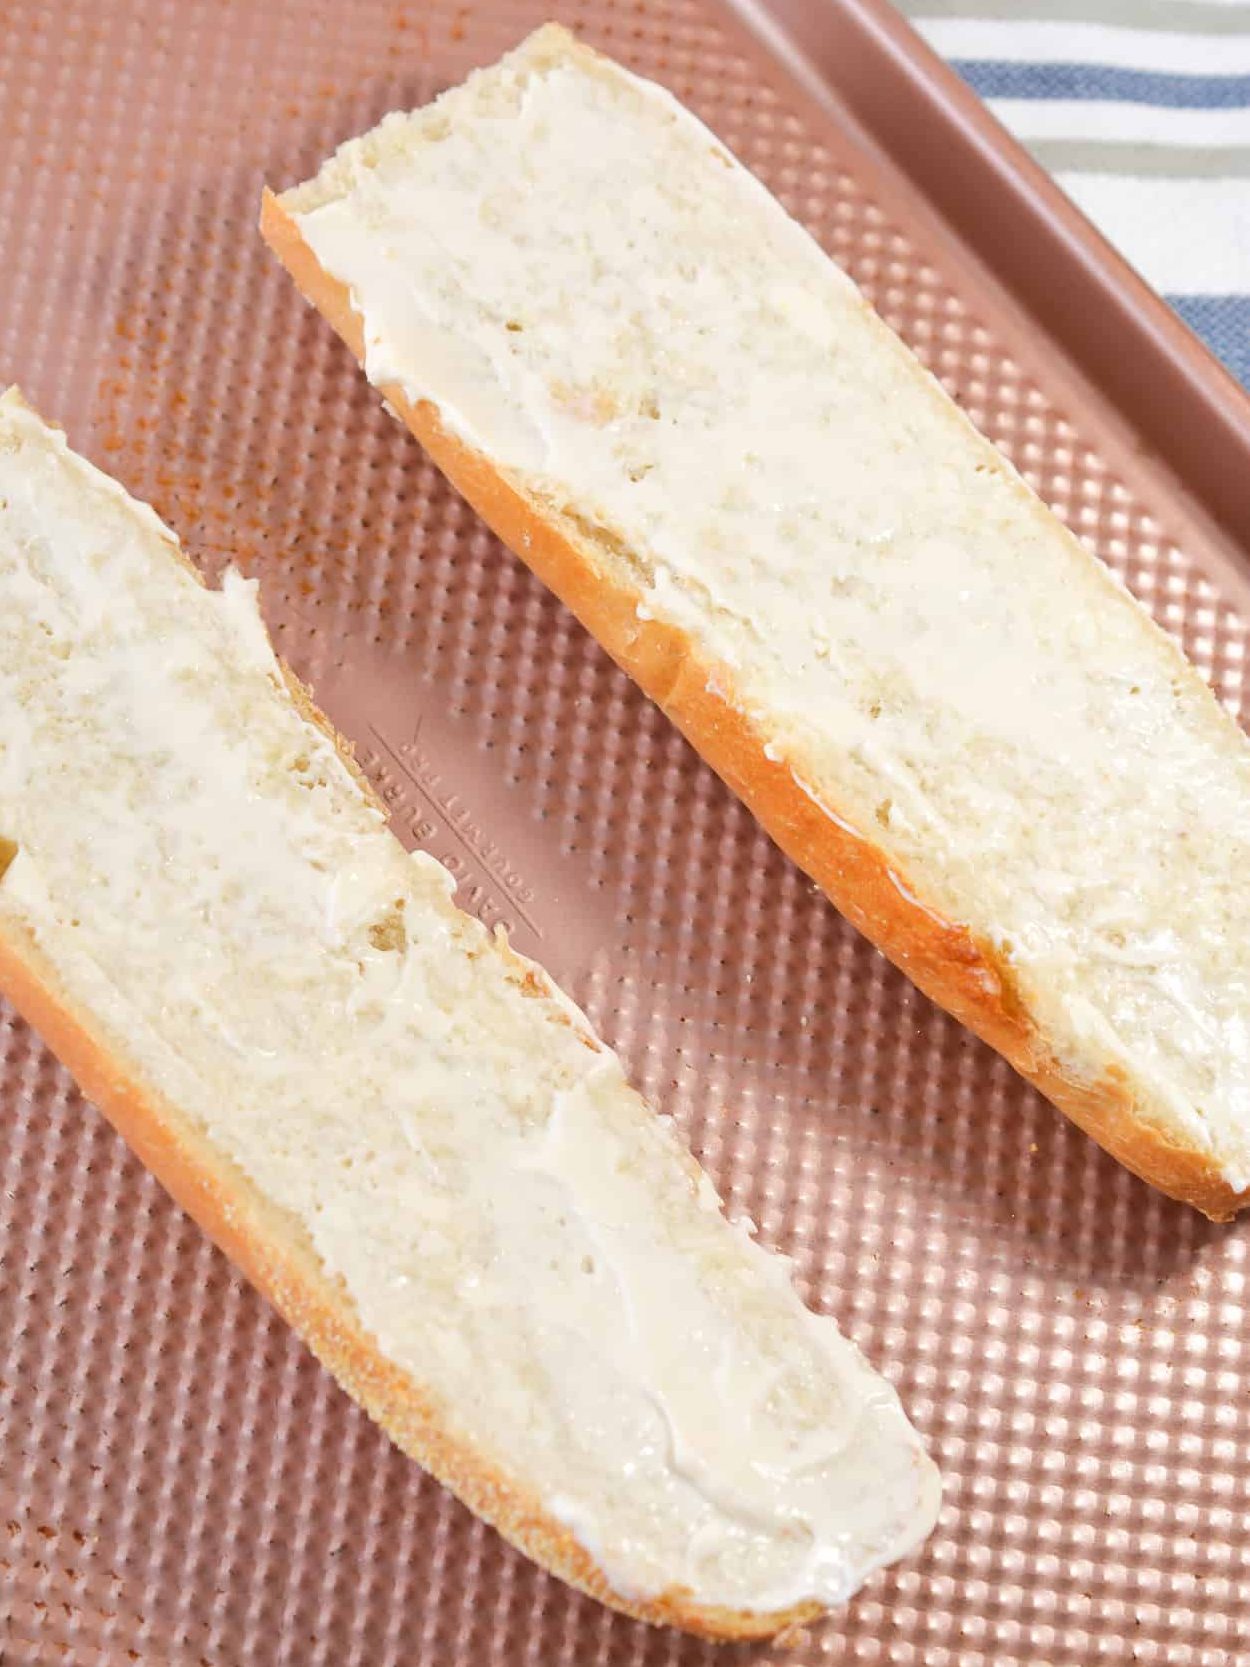 Place the sliced bread open side up on a baking sheet and add a layer of mayonnaise to the top.